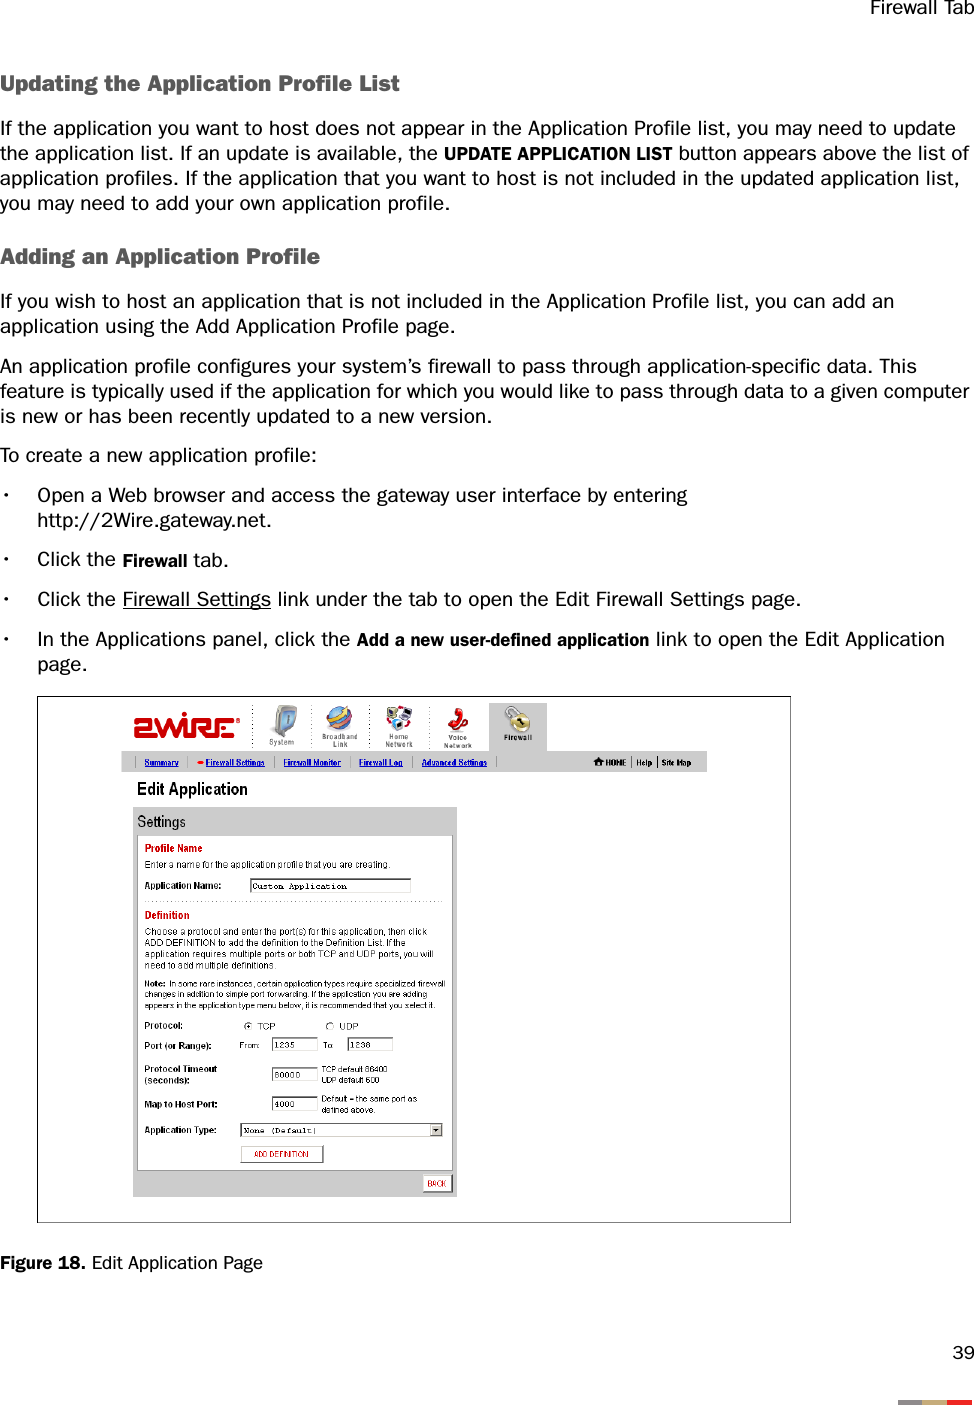 Firewall Tab39Updating the Application Profile ListIf the application you want to host does not appear in the Application Profile list, you may need to update the application list. If an update is available, the UPDATE APPLICATION LIST button appears above the list of application profiles. If the application that you want to host is not included in the updated application list, you may need to add your own application profile.Adding an Application ProfileIf you wish to host an application that is not included in the Application Profile list, you can add an application using the Add Application Profile page.An application profile configures your system’s firewall to pass through application-specific data. This feature is typically used if the application for which you would like to pass through data to a given computer is new or has been recently updated to a new version.To create a new application profile:• Open a Web browser and access the gateway user interface by enteringhttp://2Wire.gateway.net.• Click the Firewall tab.• Click the Firewall Settings link under the tab to open the Edit Firewall Settings page.• In the Applications panel, click the Add a new user-defined application link to open the Edit Application page.Figure 18. Edit Application Page